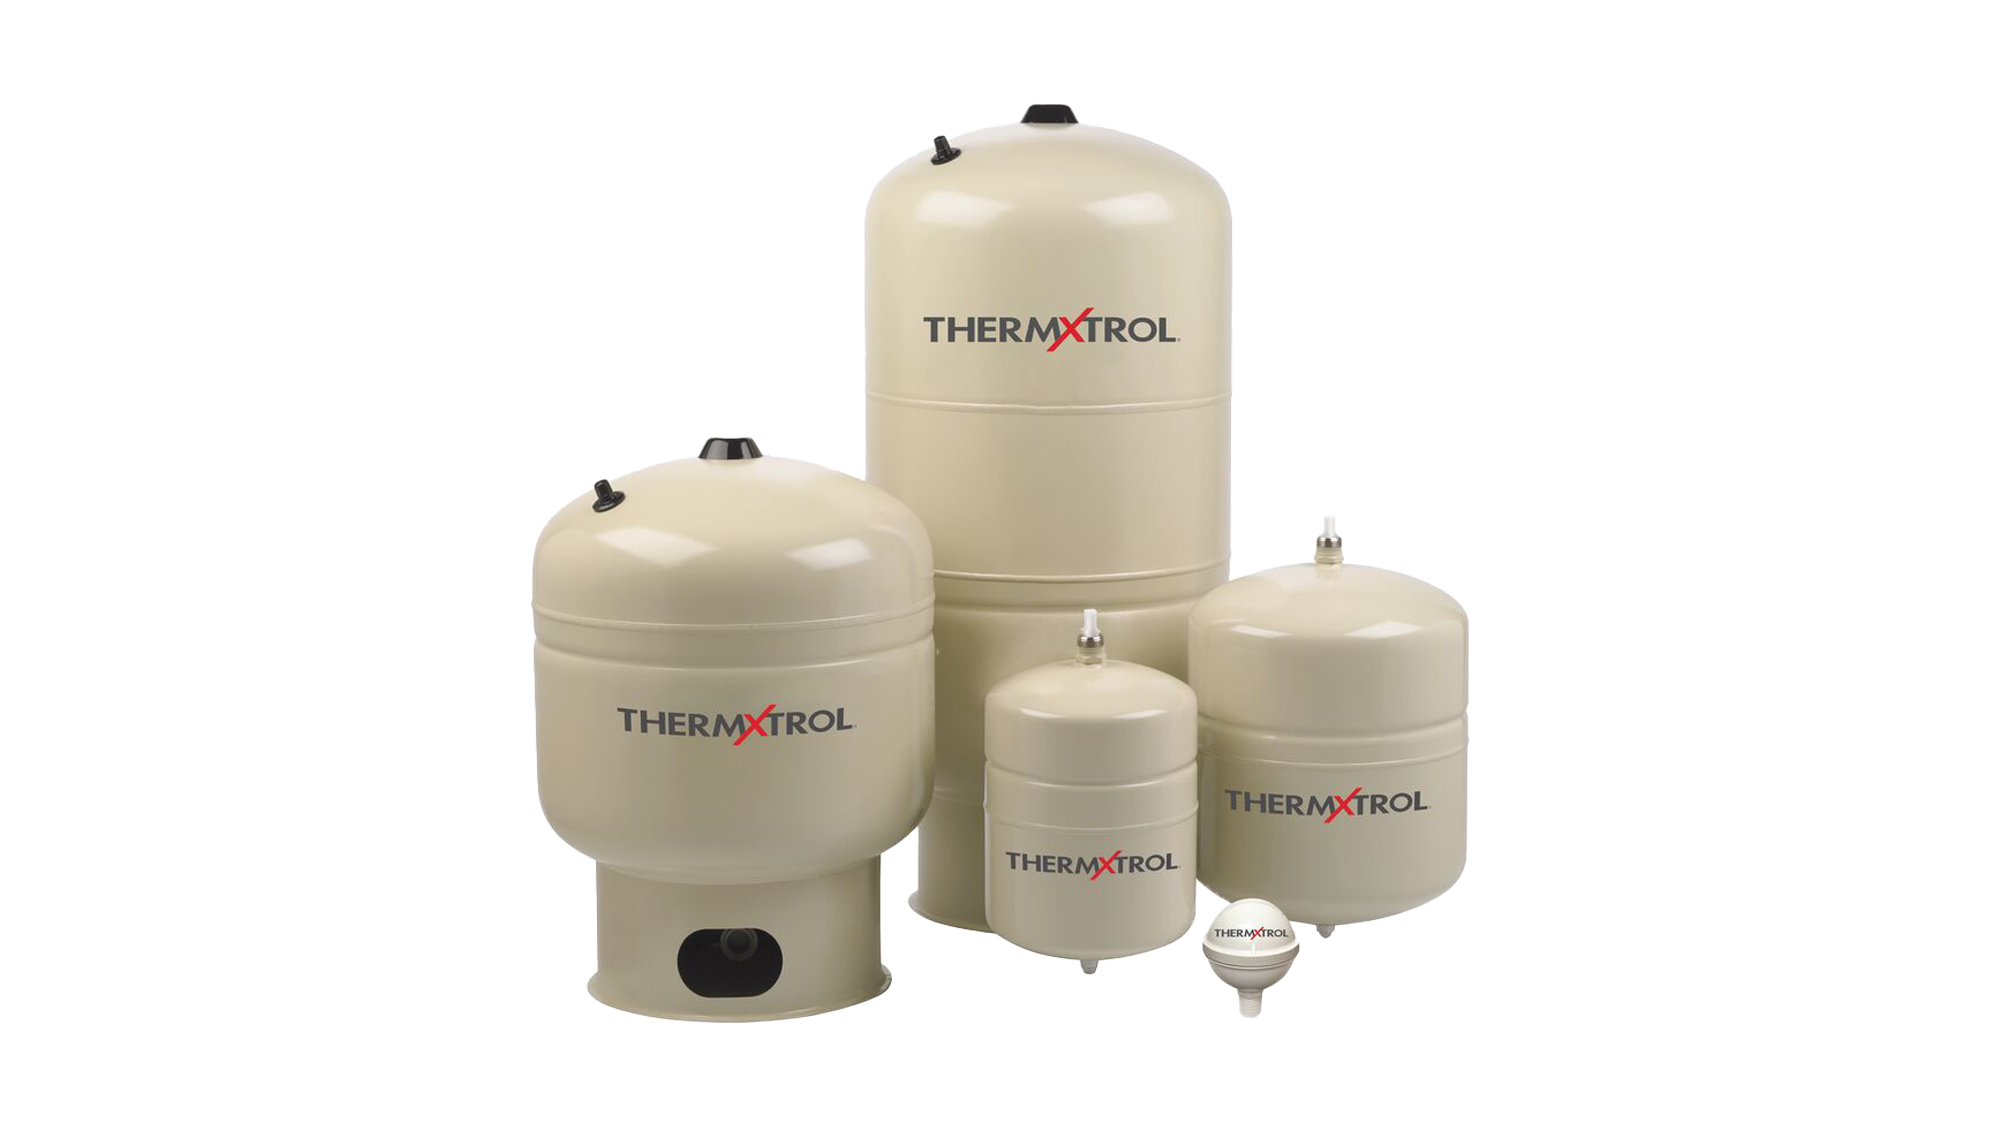 Group of ThermXtrol canisters